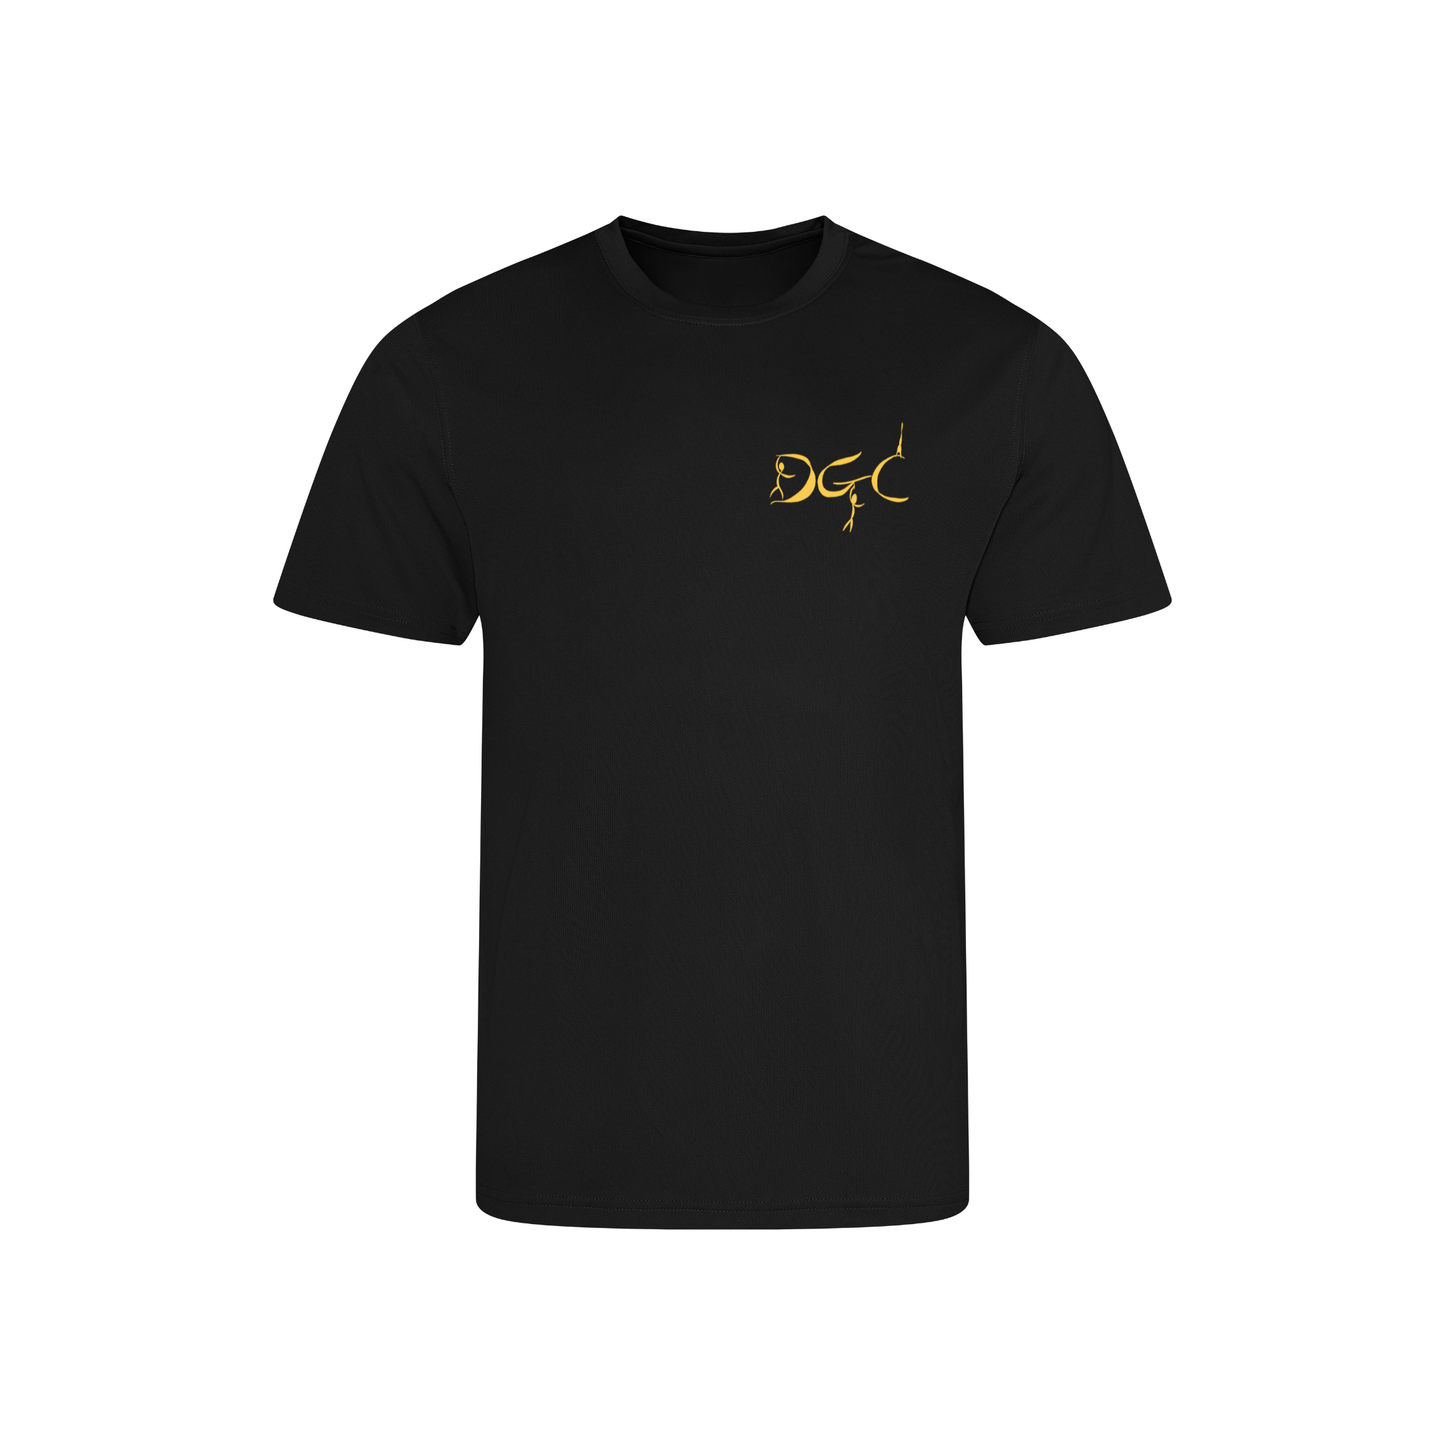 Dysons Dry-fit T-Shirt Black with Gold Logo (JC001/01/02)